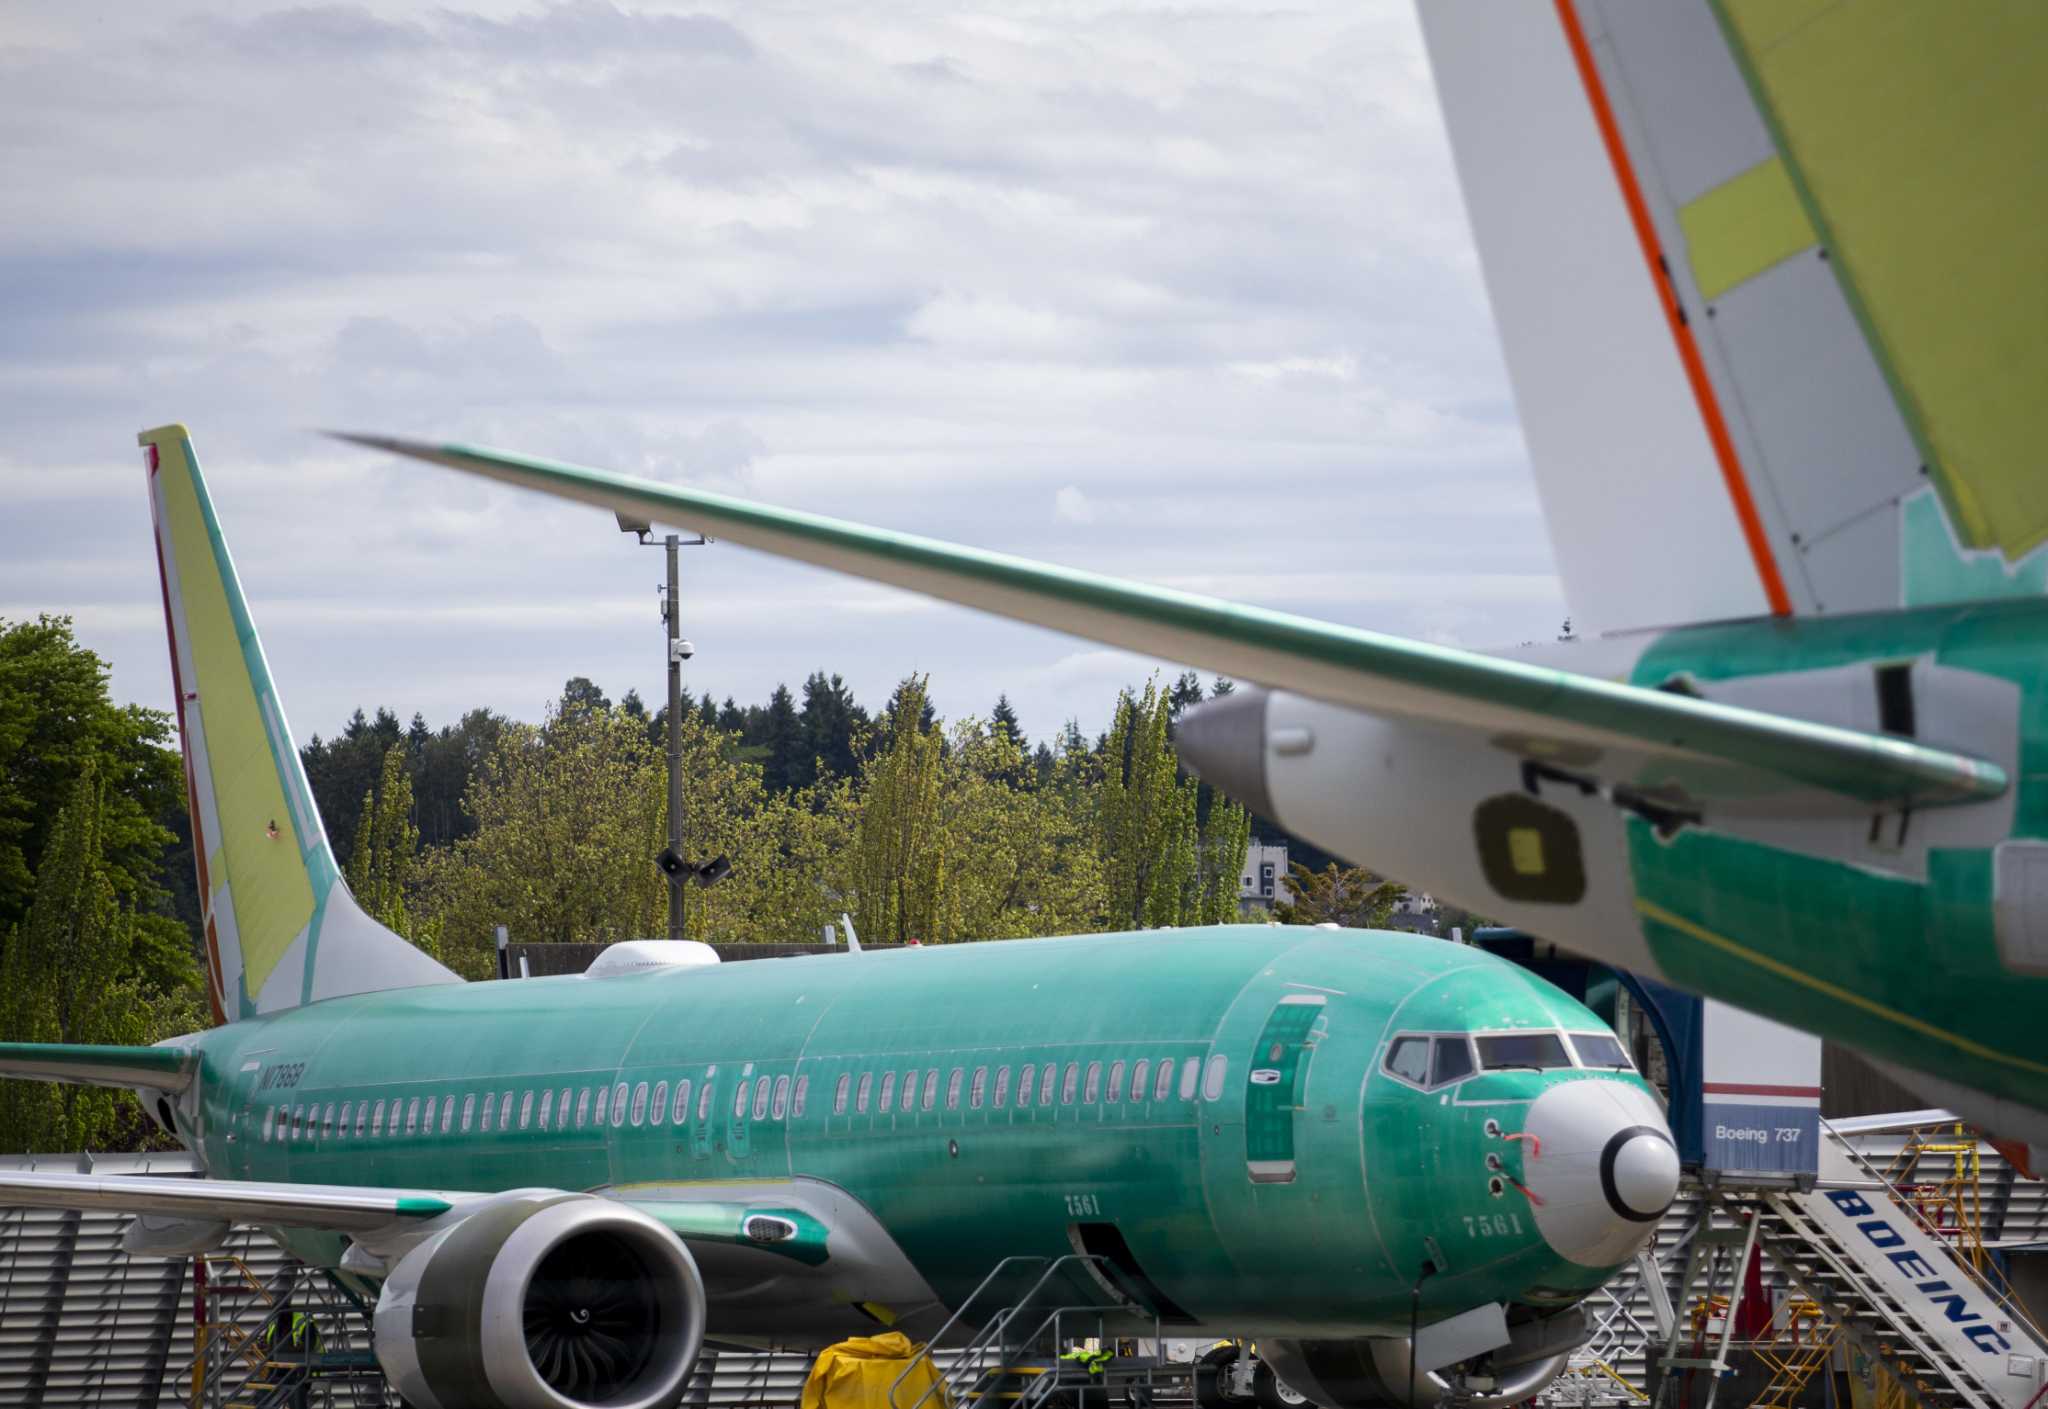 737 max grounded